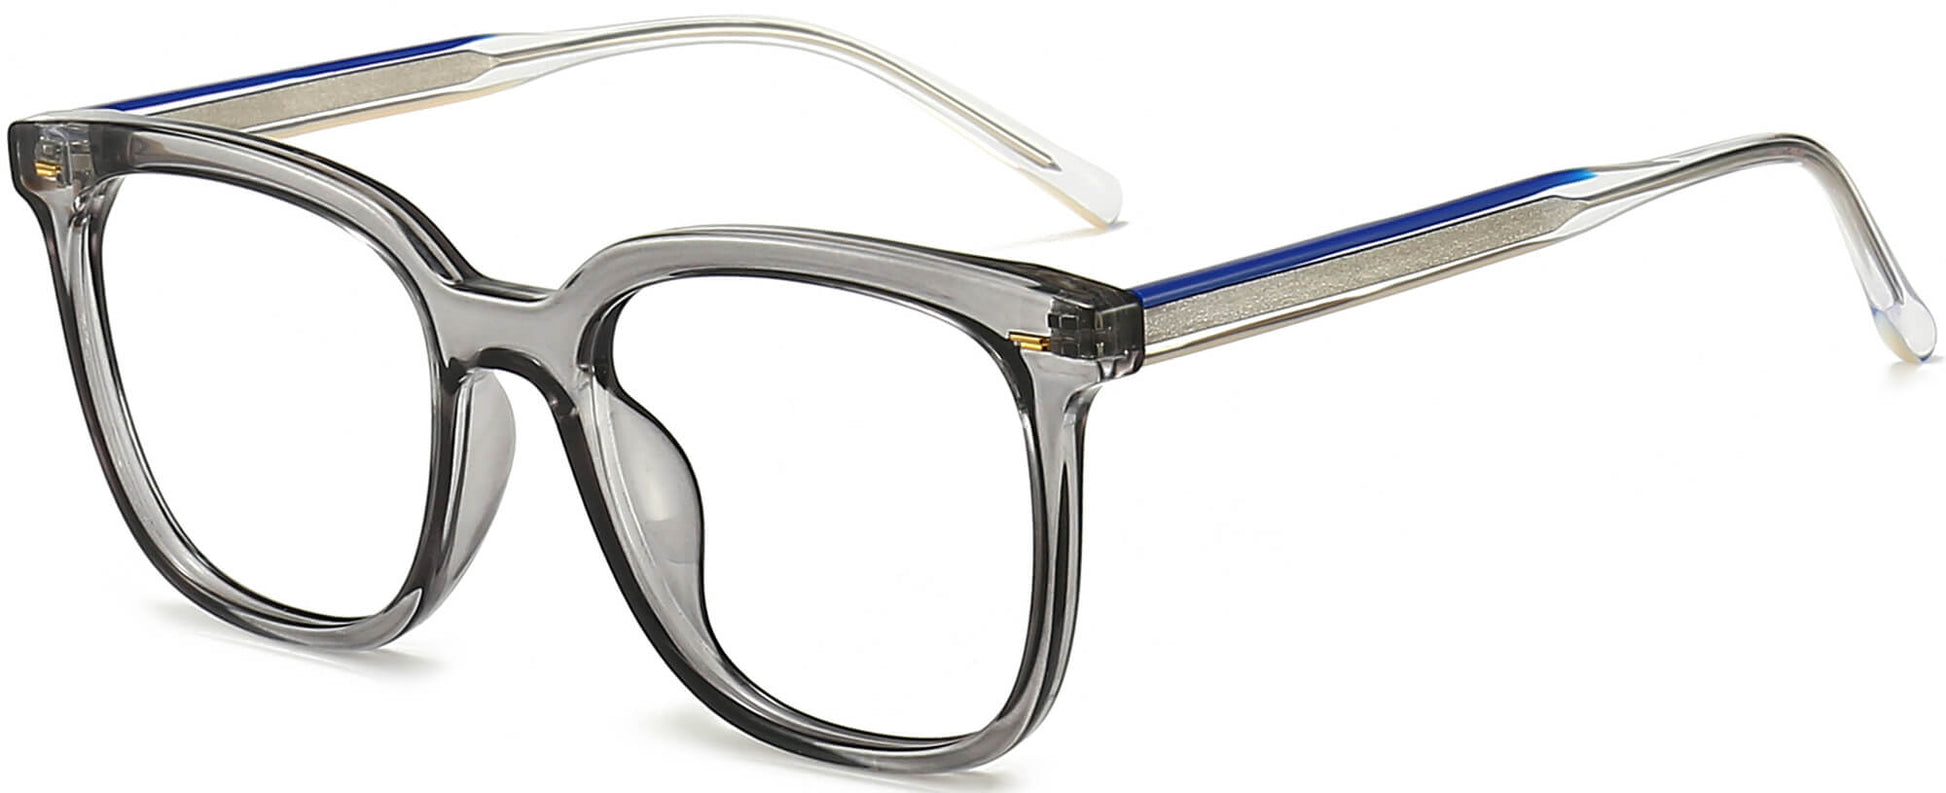 Oaklyn Square Gray Eyeglasses from ANRRI, angle view